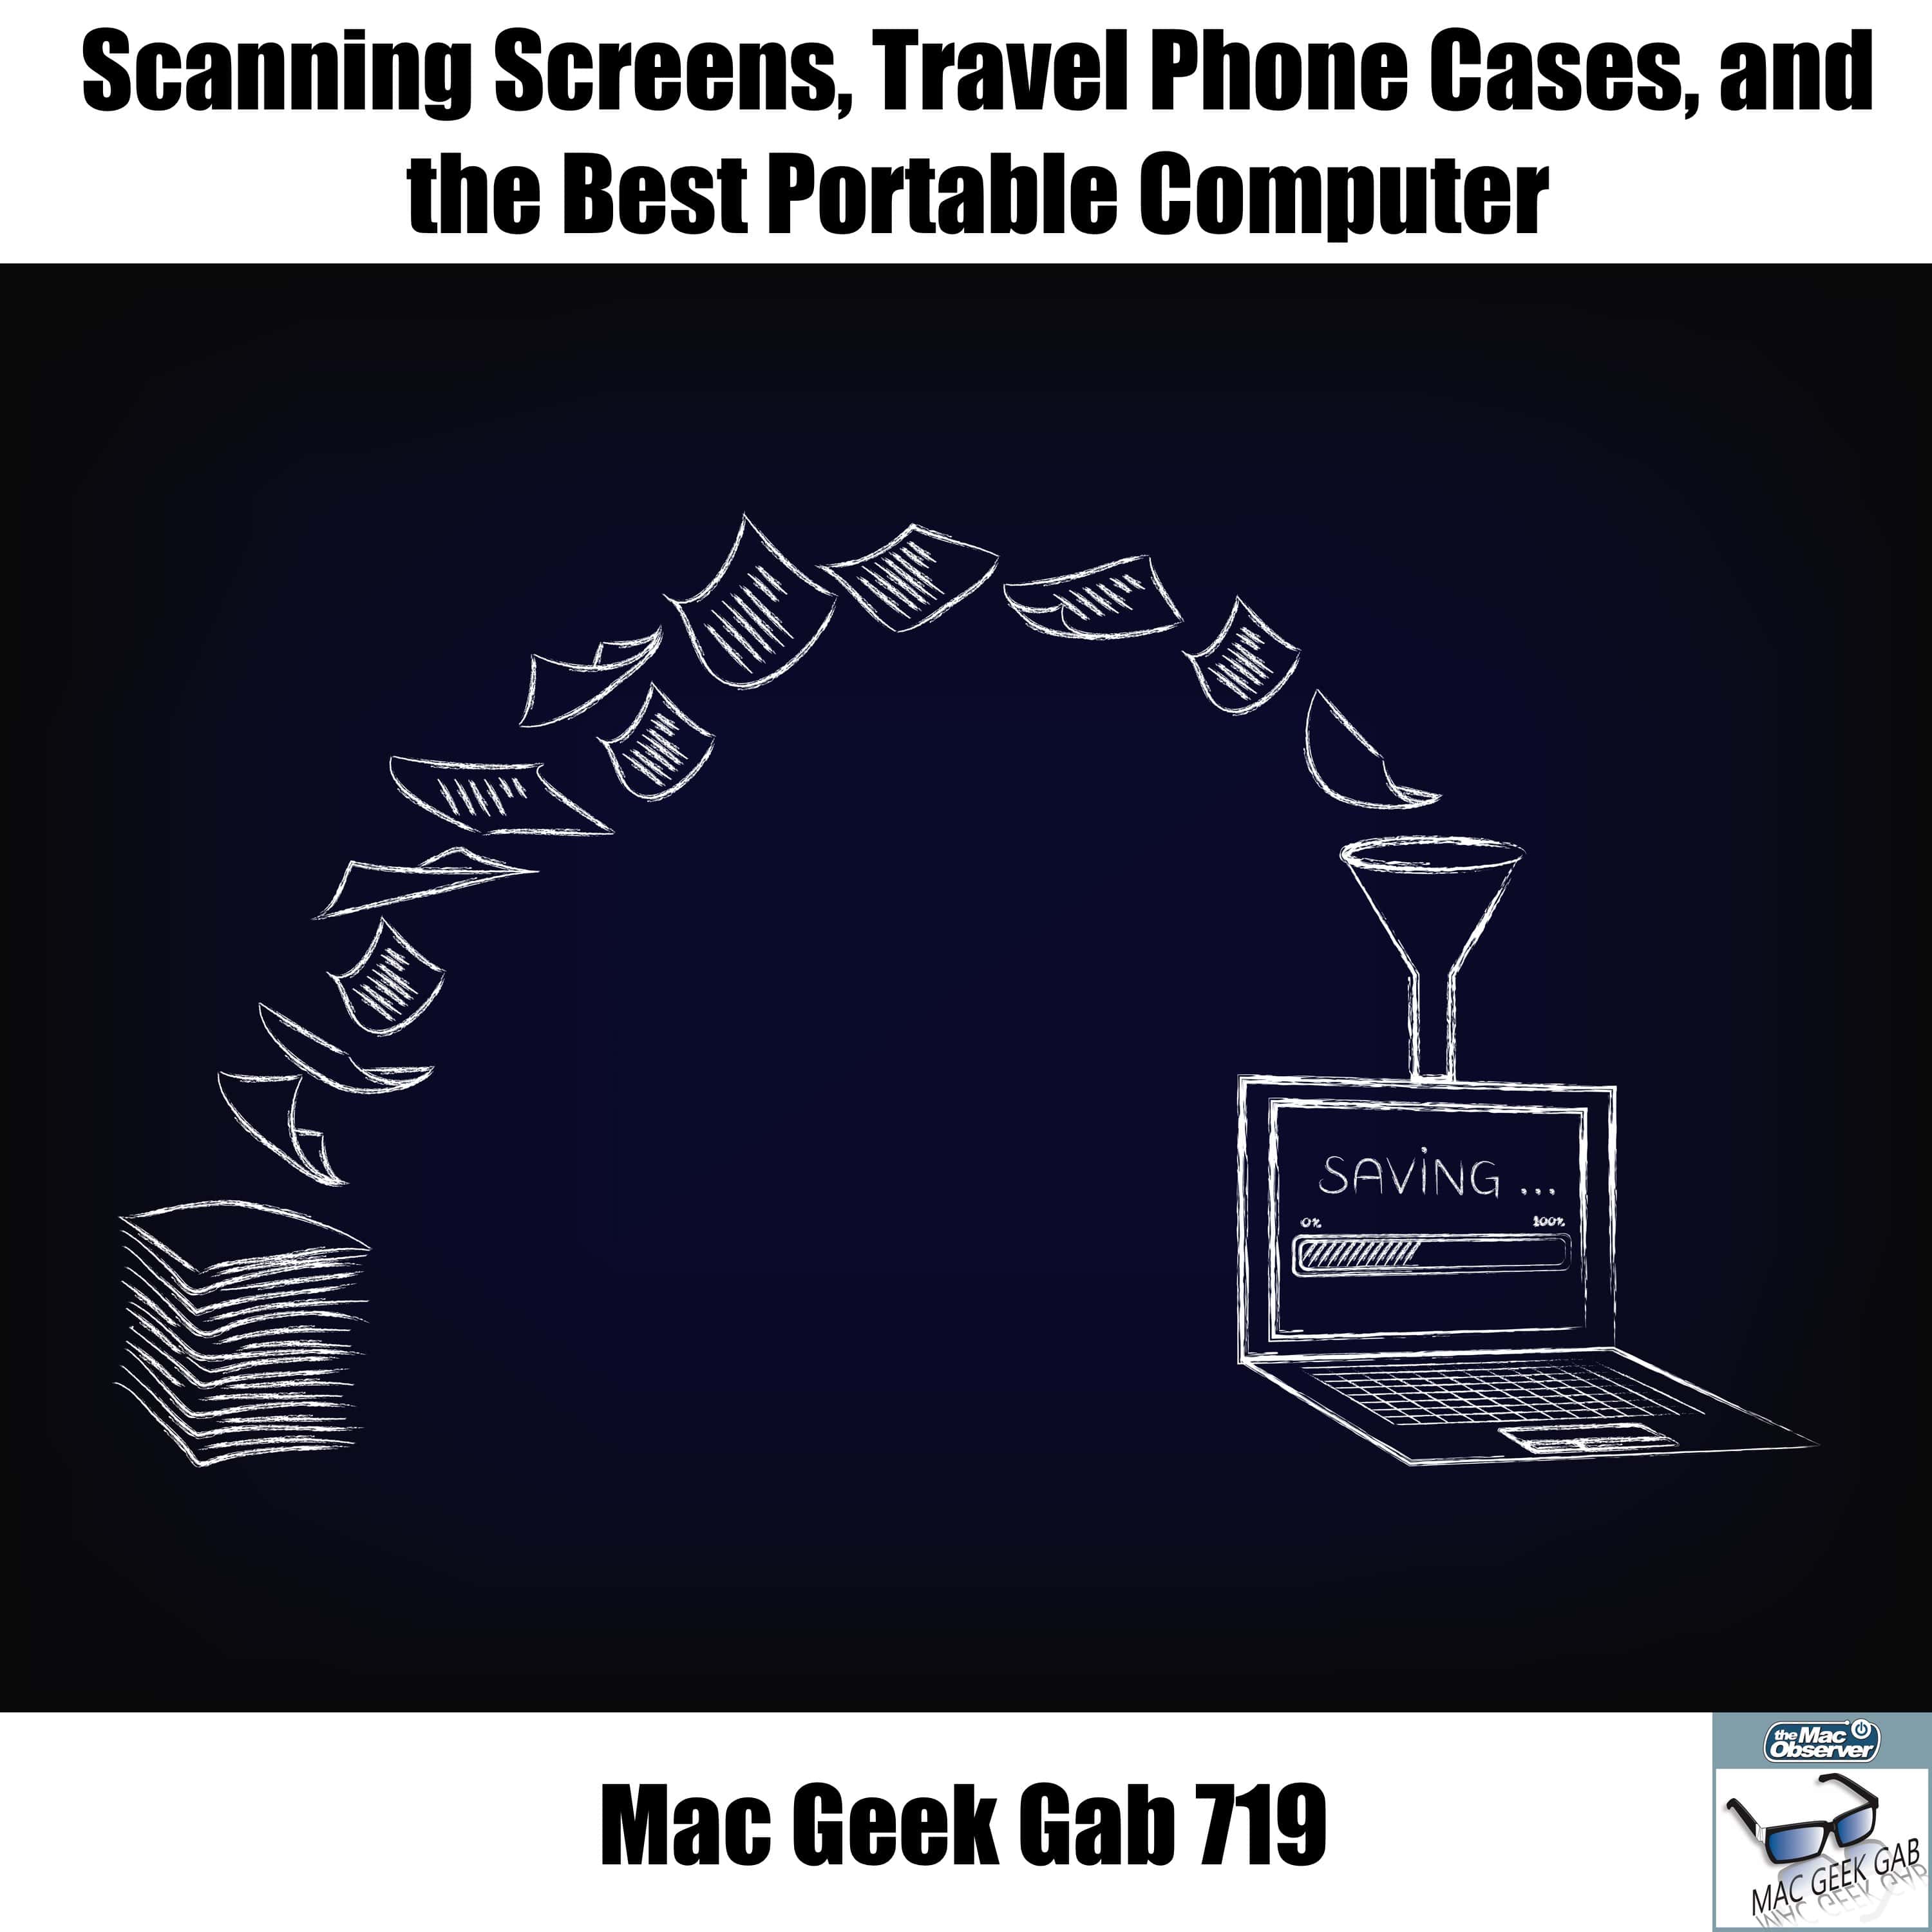 Scanning, OCR, Travel Phone Cases, and the Best Portable Computer – Mac Geek Gab 719